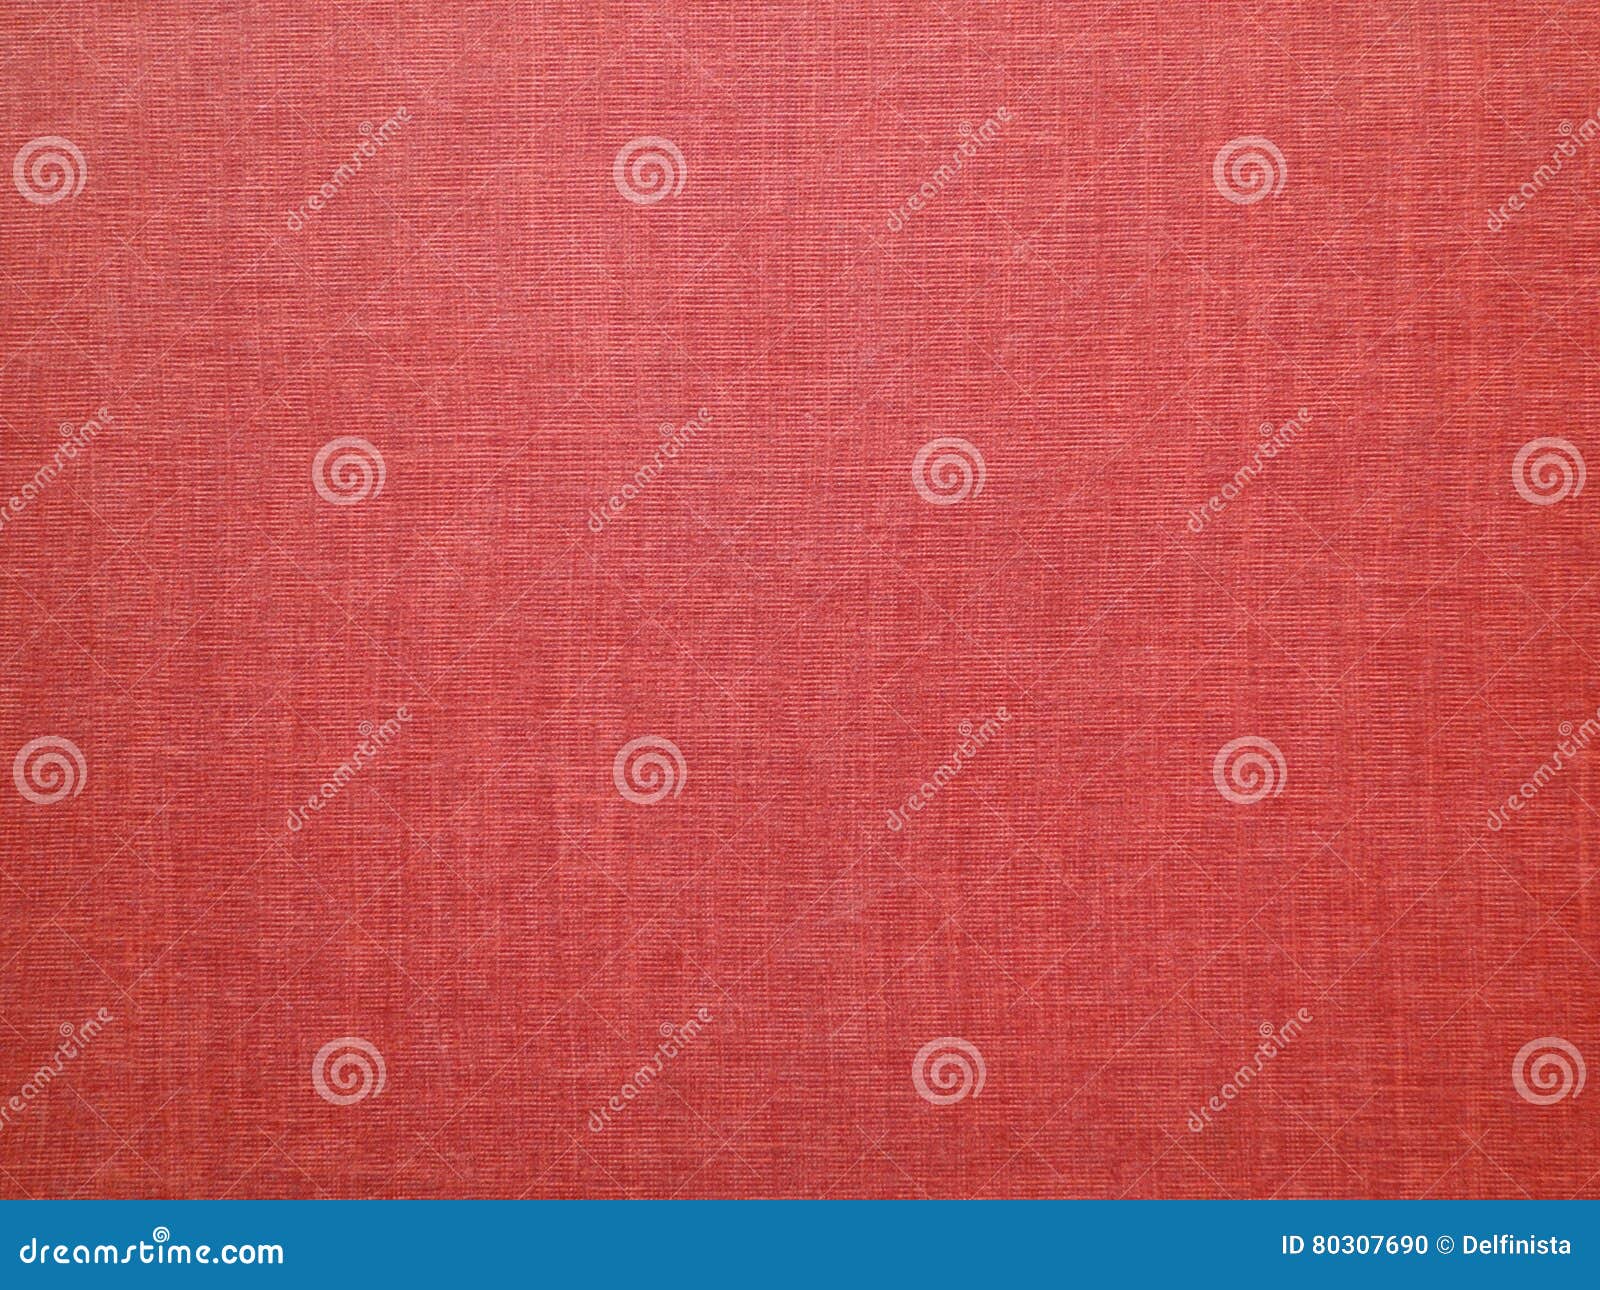 red backround - old canvas - stock photo